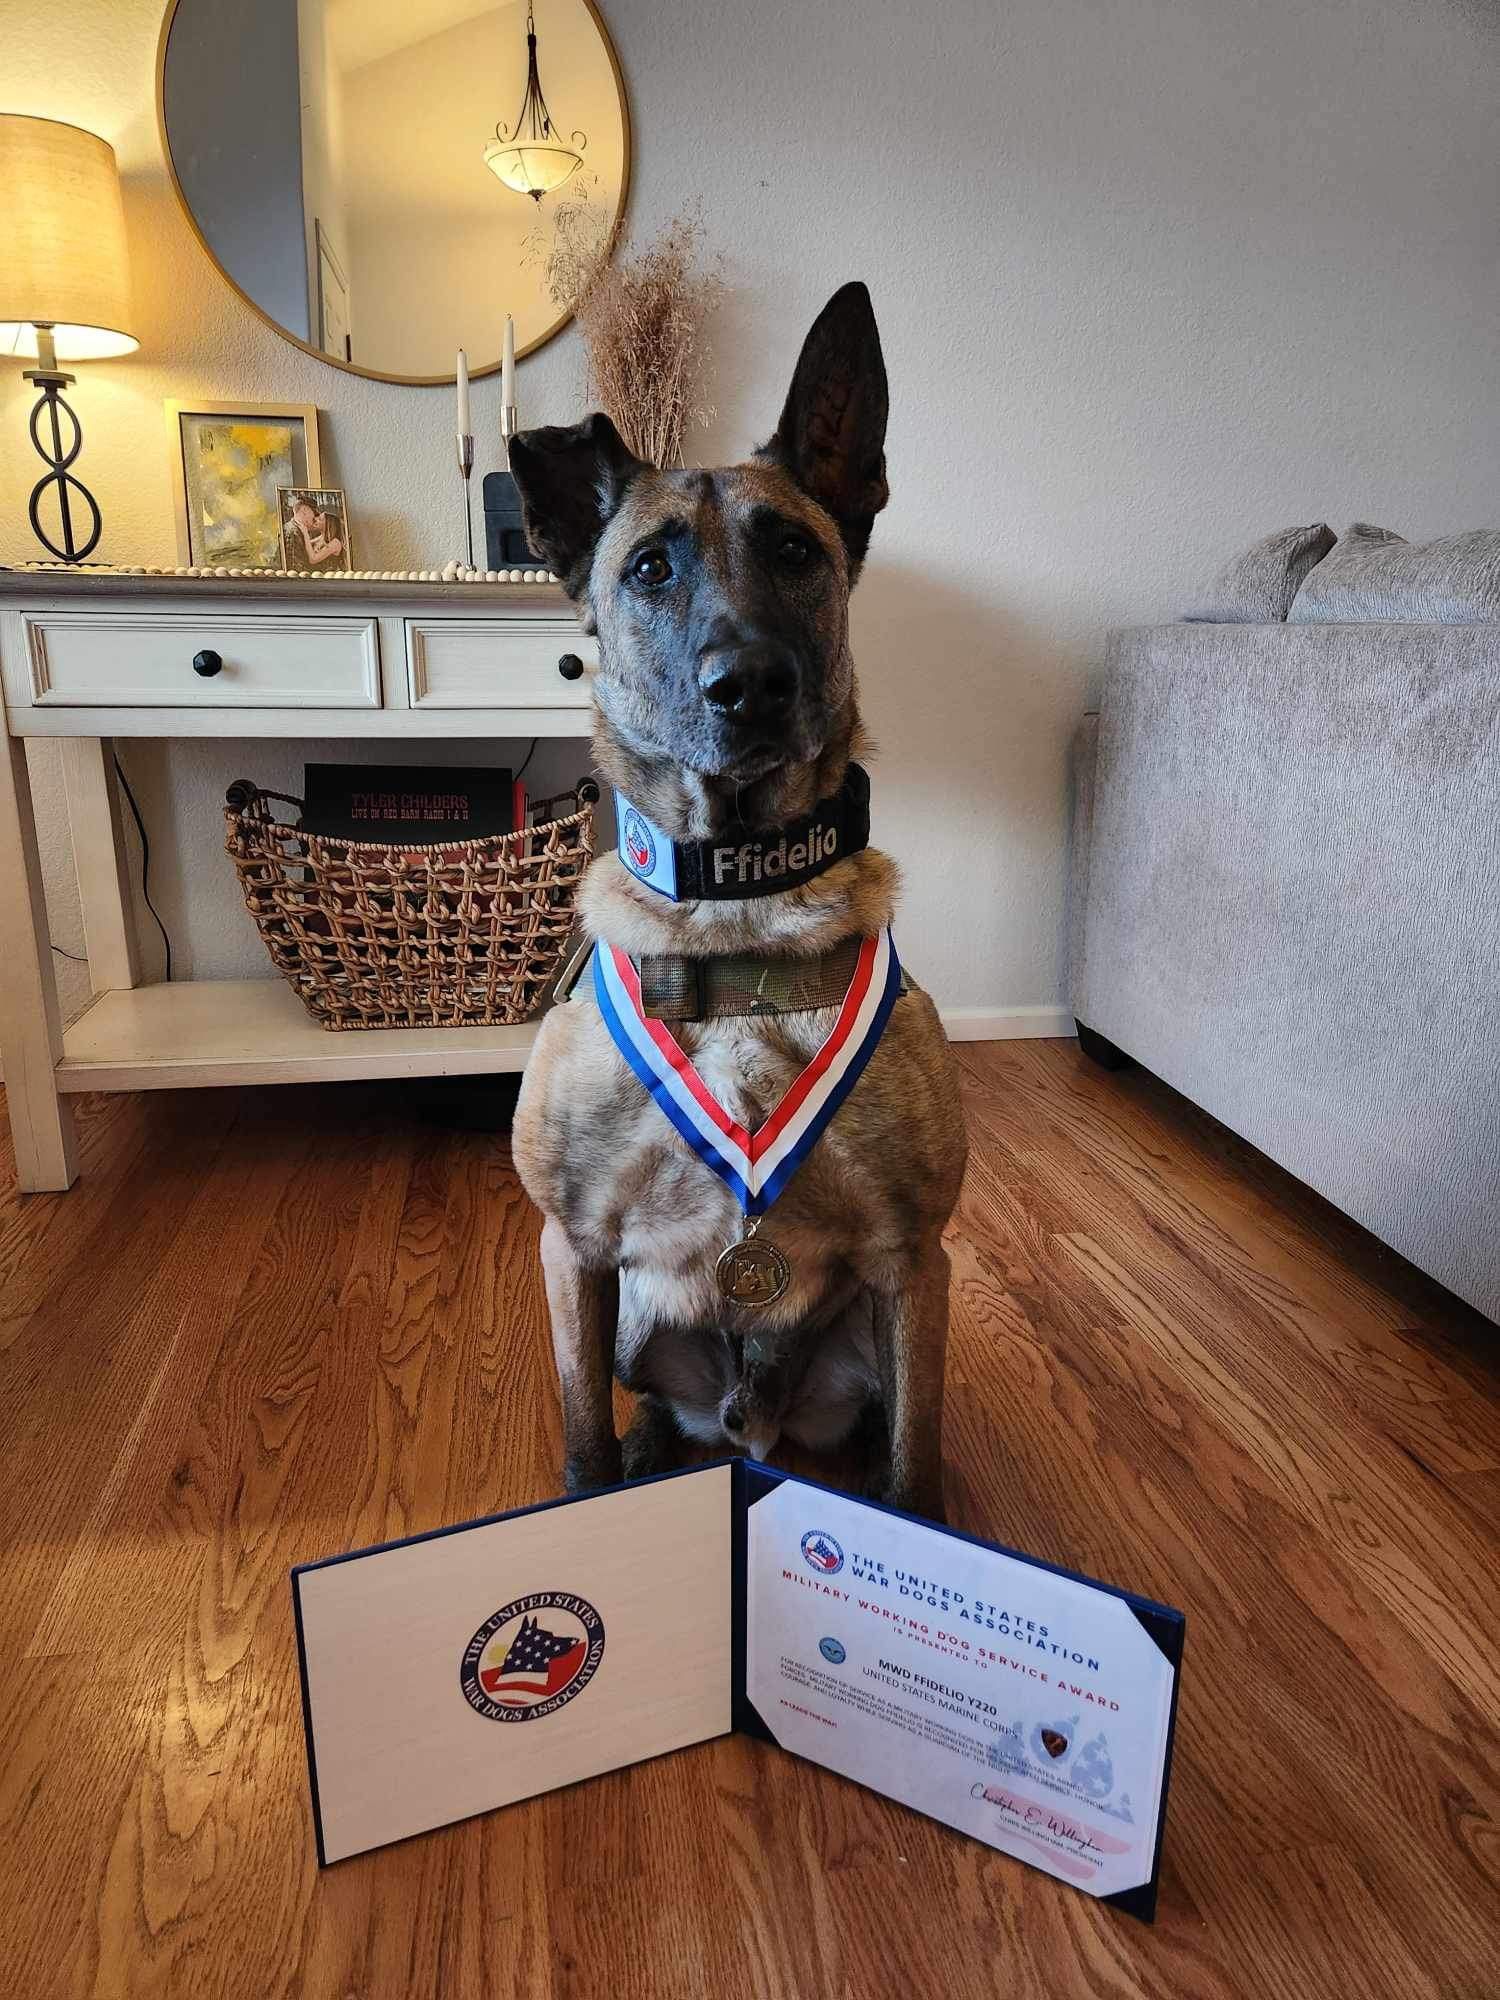 A dog wearing a medal around its neck is sitting next to a certificate.